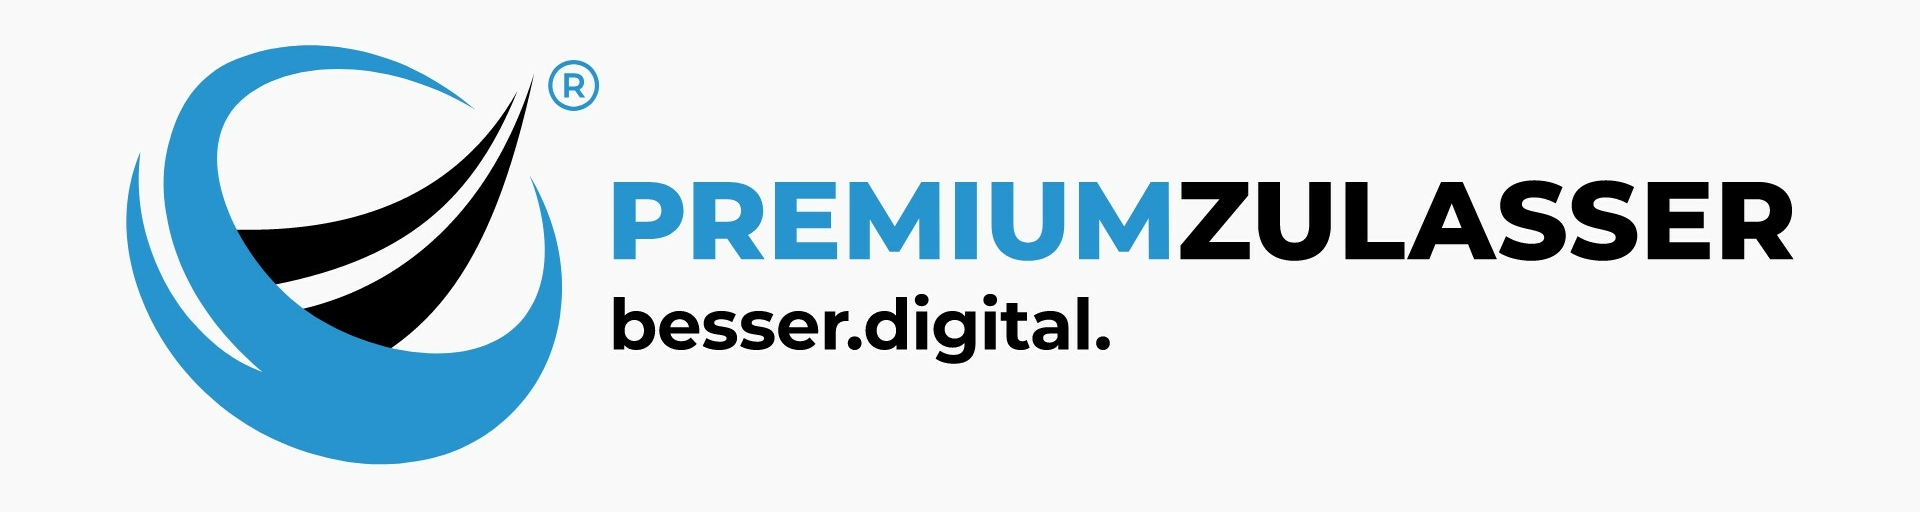 The Premiumzulasser eG strengthens its nationwide presence. Just two years after entering the market, 40 local and regional registration service providers have joined together to form a nationwide association under the umbrella of the Cologne cooperative.